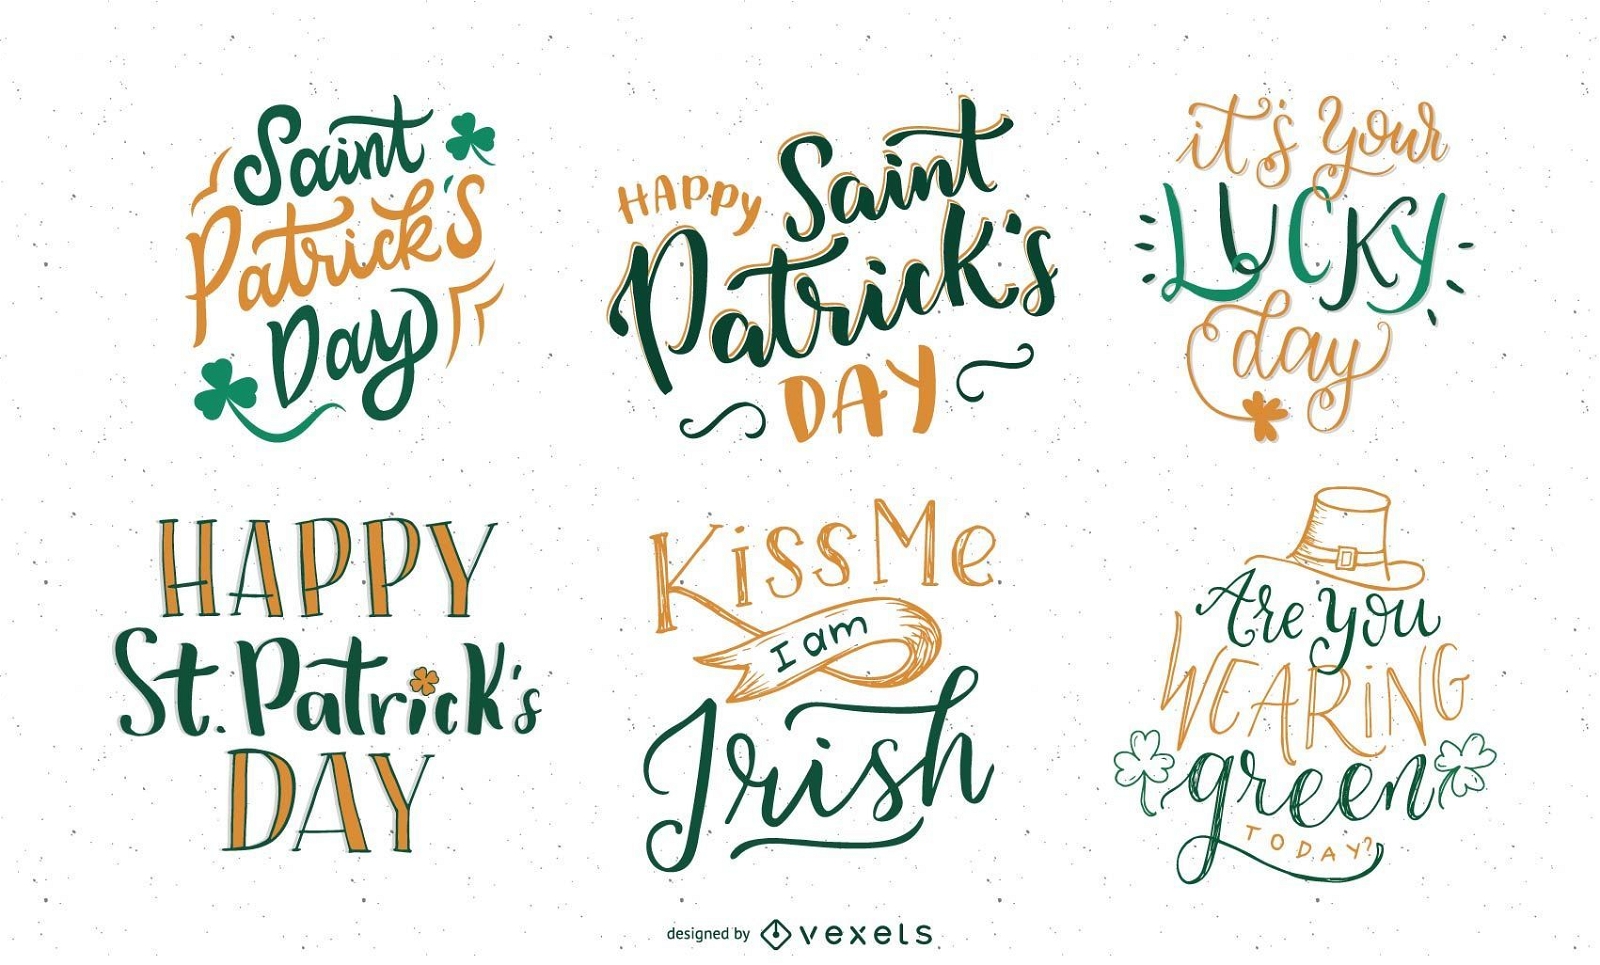 Premium Vector  St patrick's day quotes and lettering vector